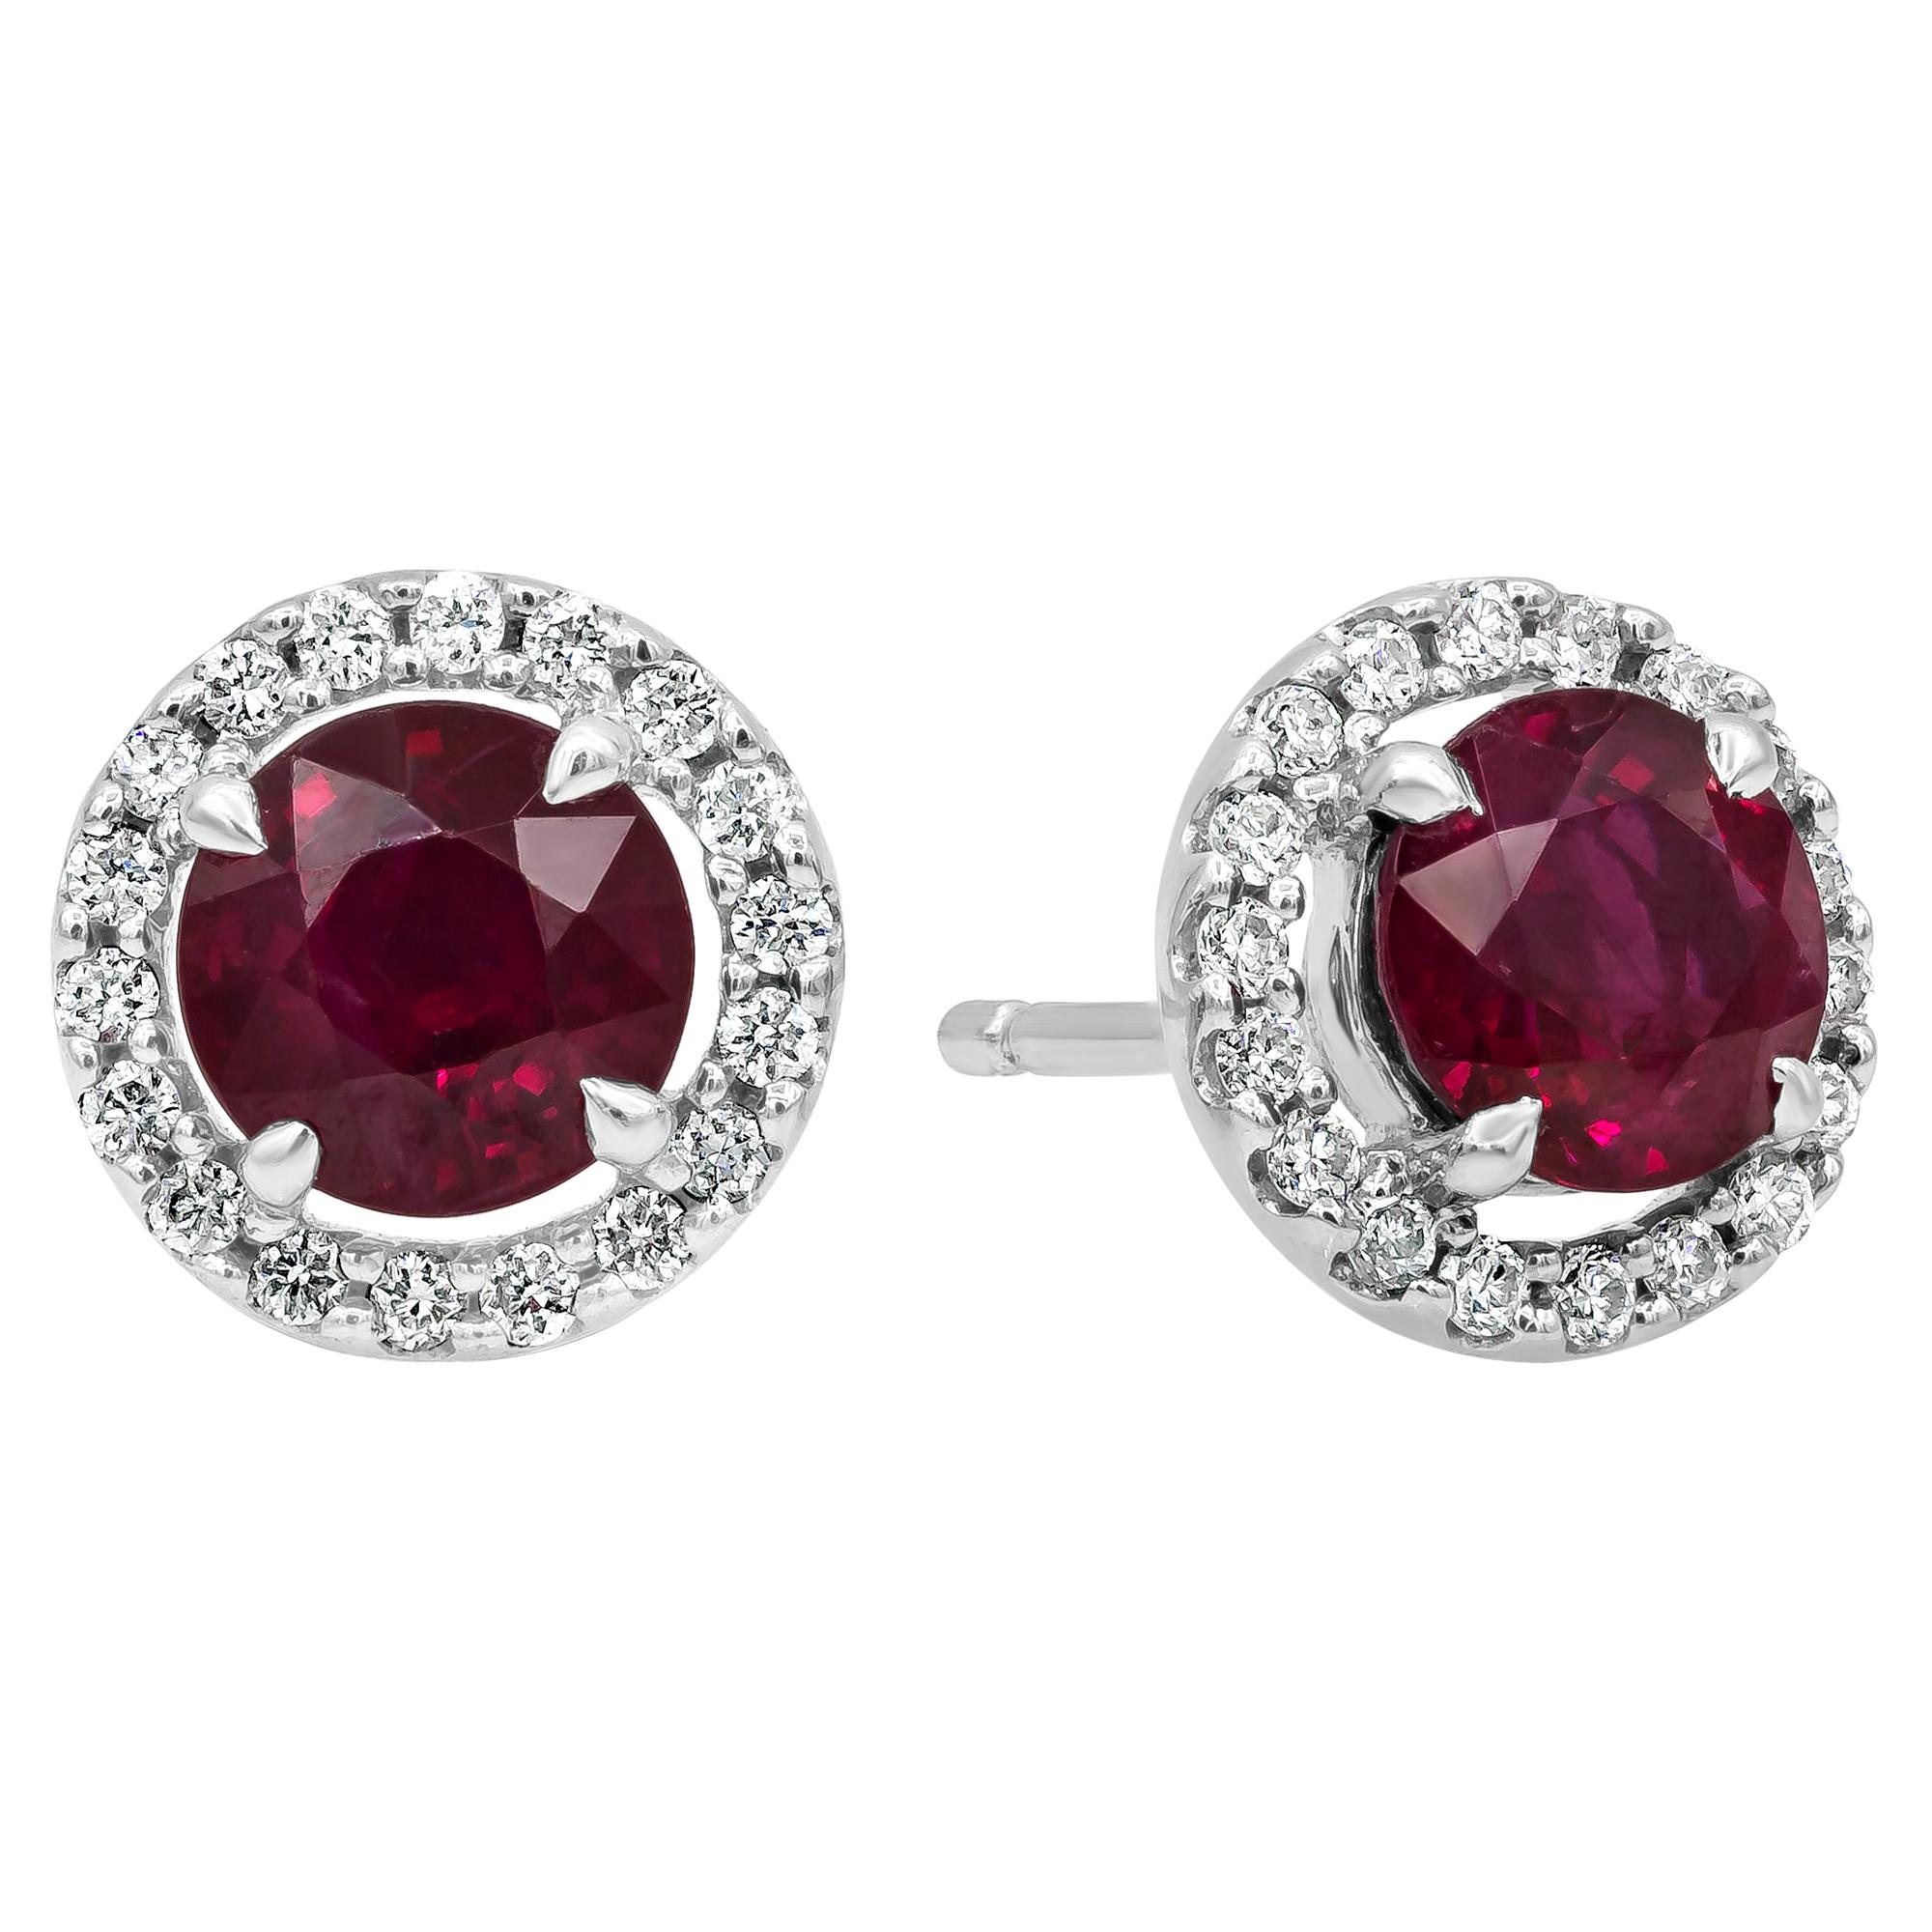 Roman Malakov 2.11 Carats Total Brilliant Round Ruby and Diamond Stud Earrings For Sale